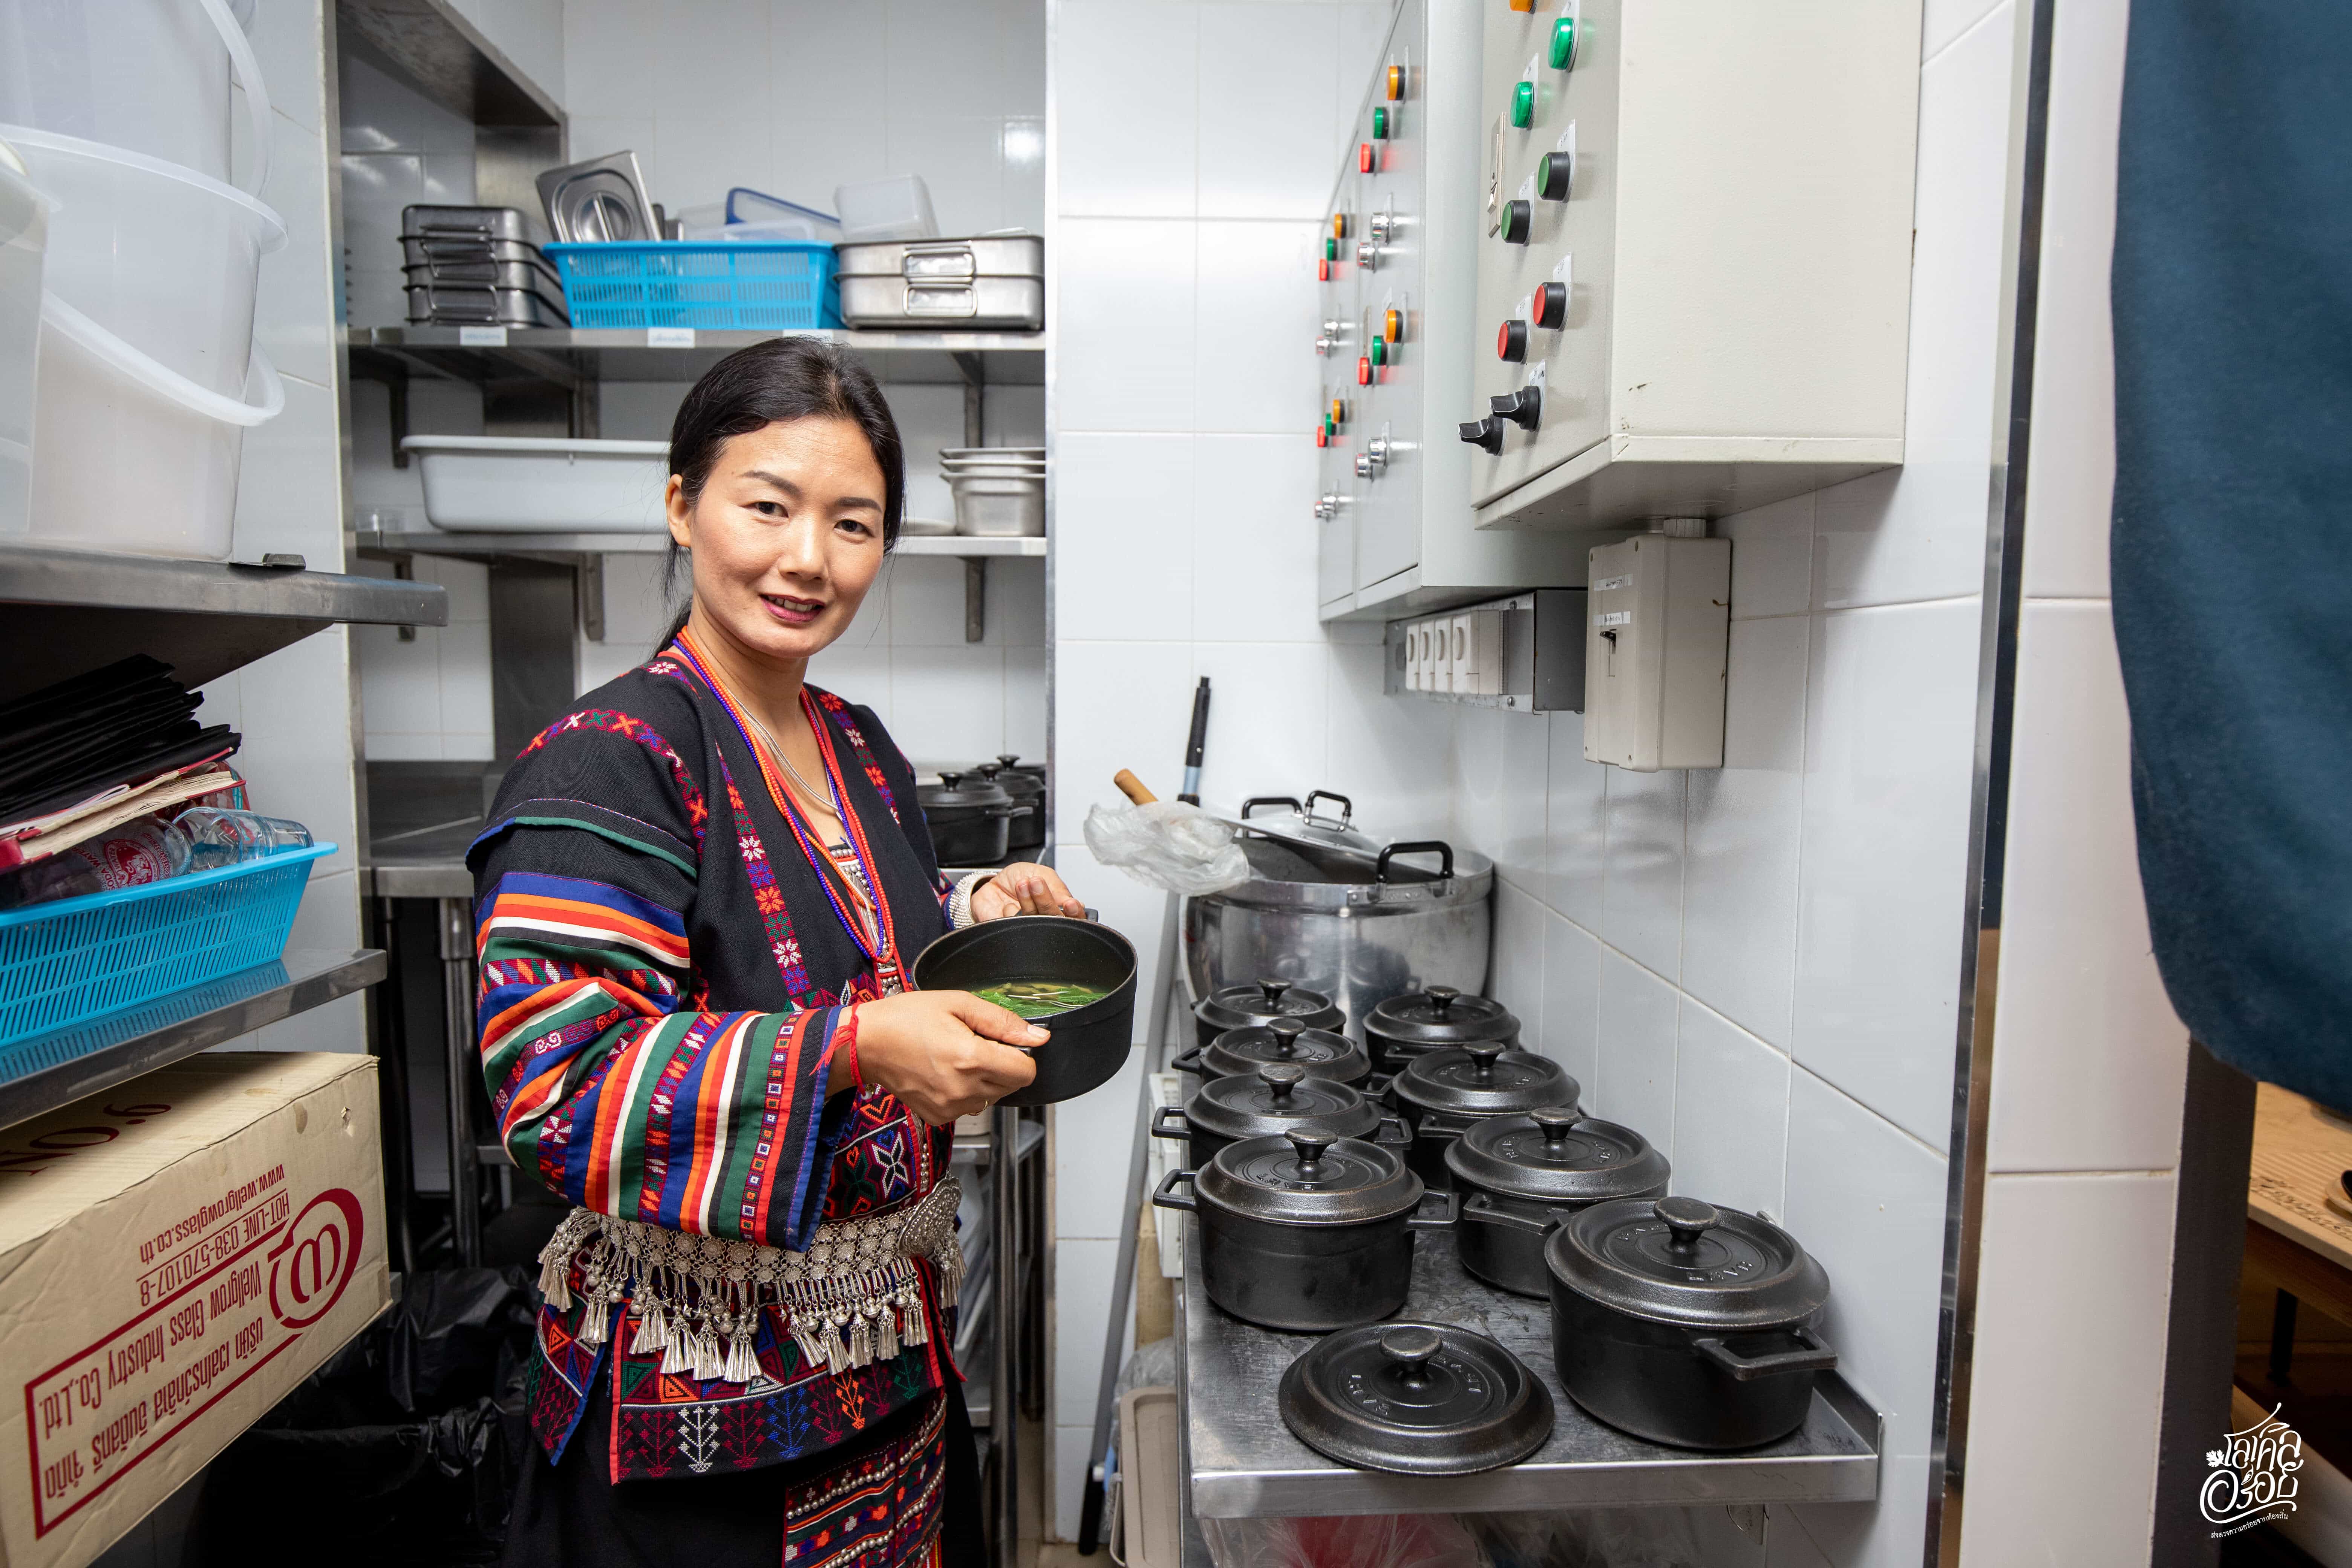 Keaw getting ready to showcase the culinary gems of the Akha tribe [left]. She hopes that interest in northern Thailand cuisine creates more interest in the country’s indigenous cultures. Photo from Local Alike